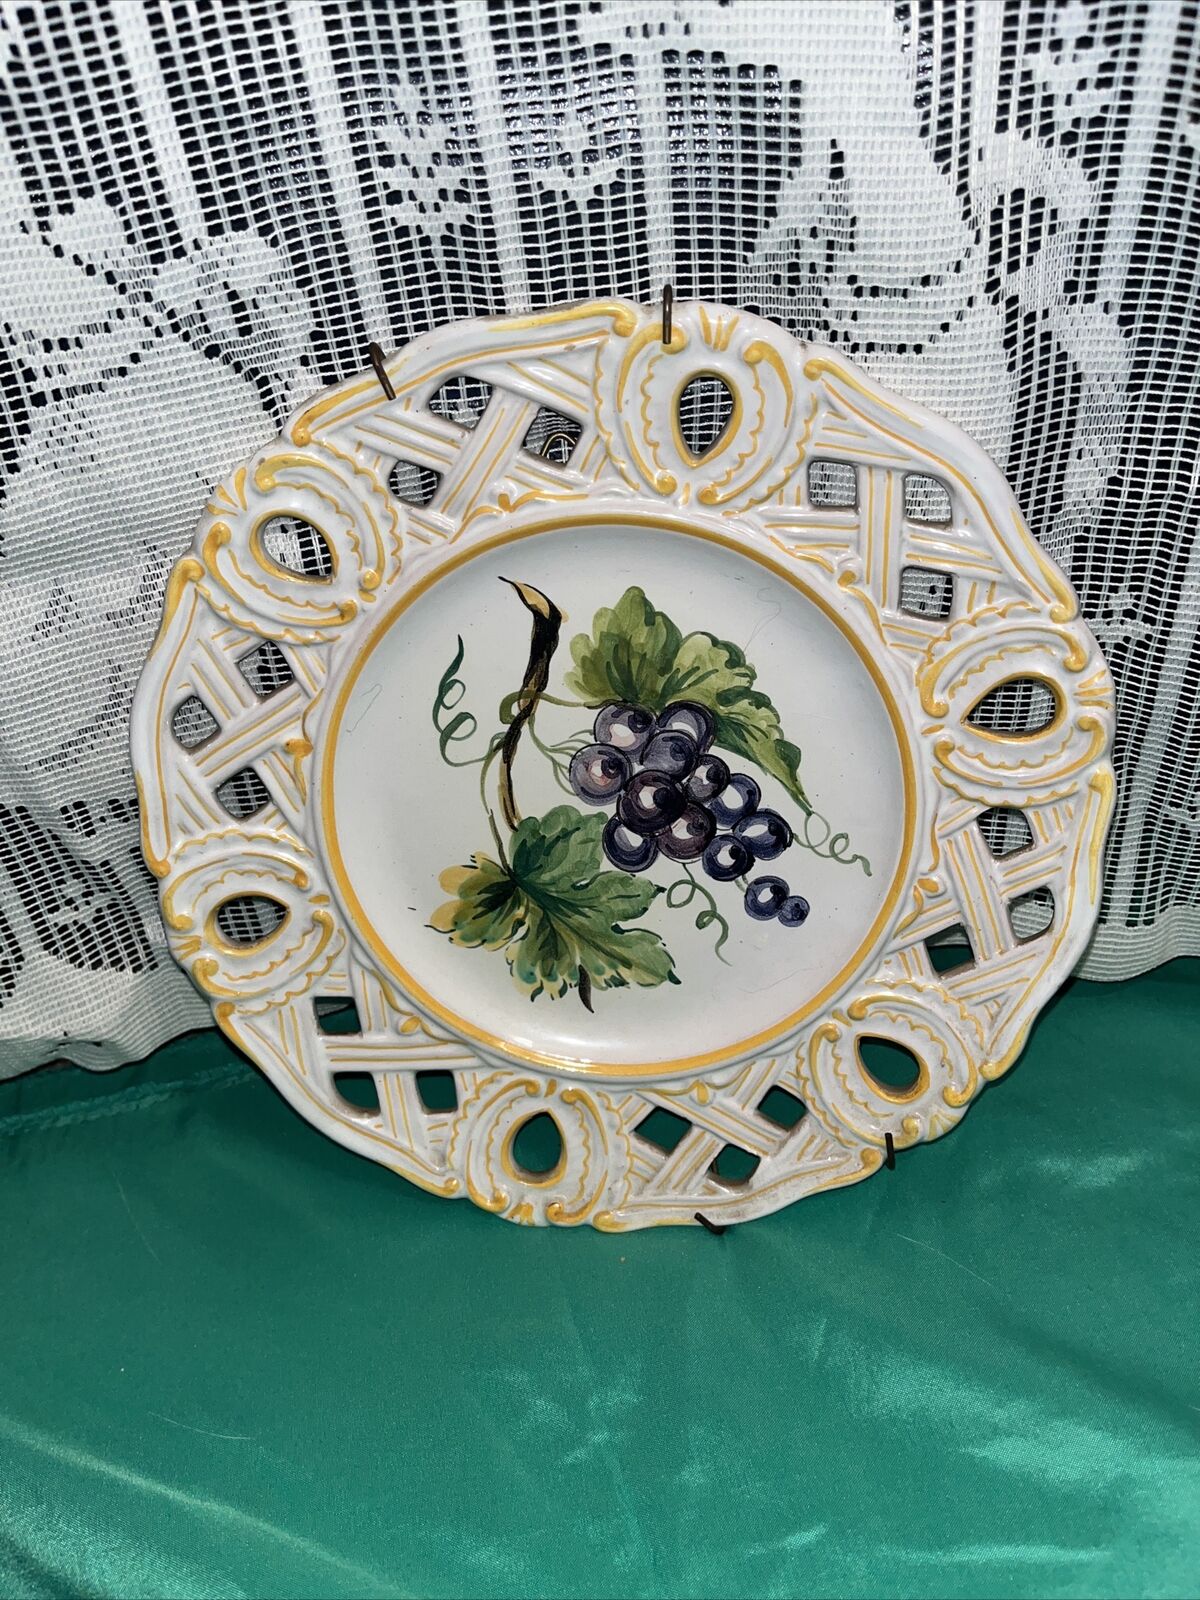 Vtg Ugo Zaccagnini Hand Painted Reticulated Plate Decorative Signed Grapes 8.5”